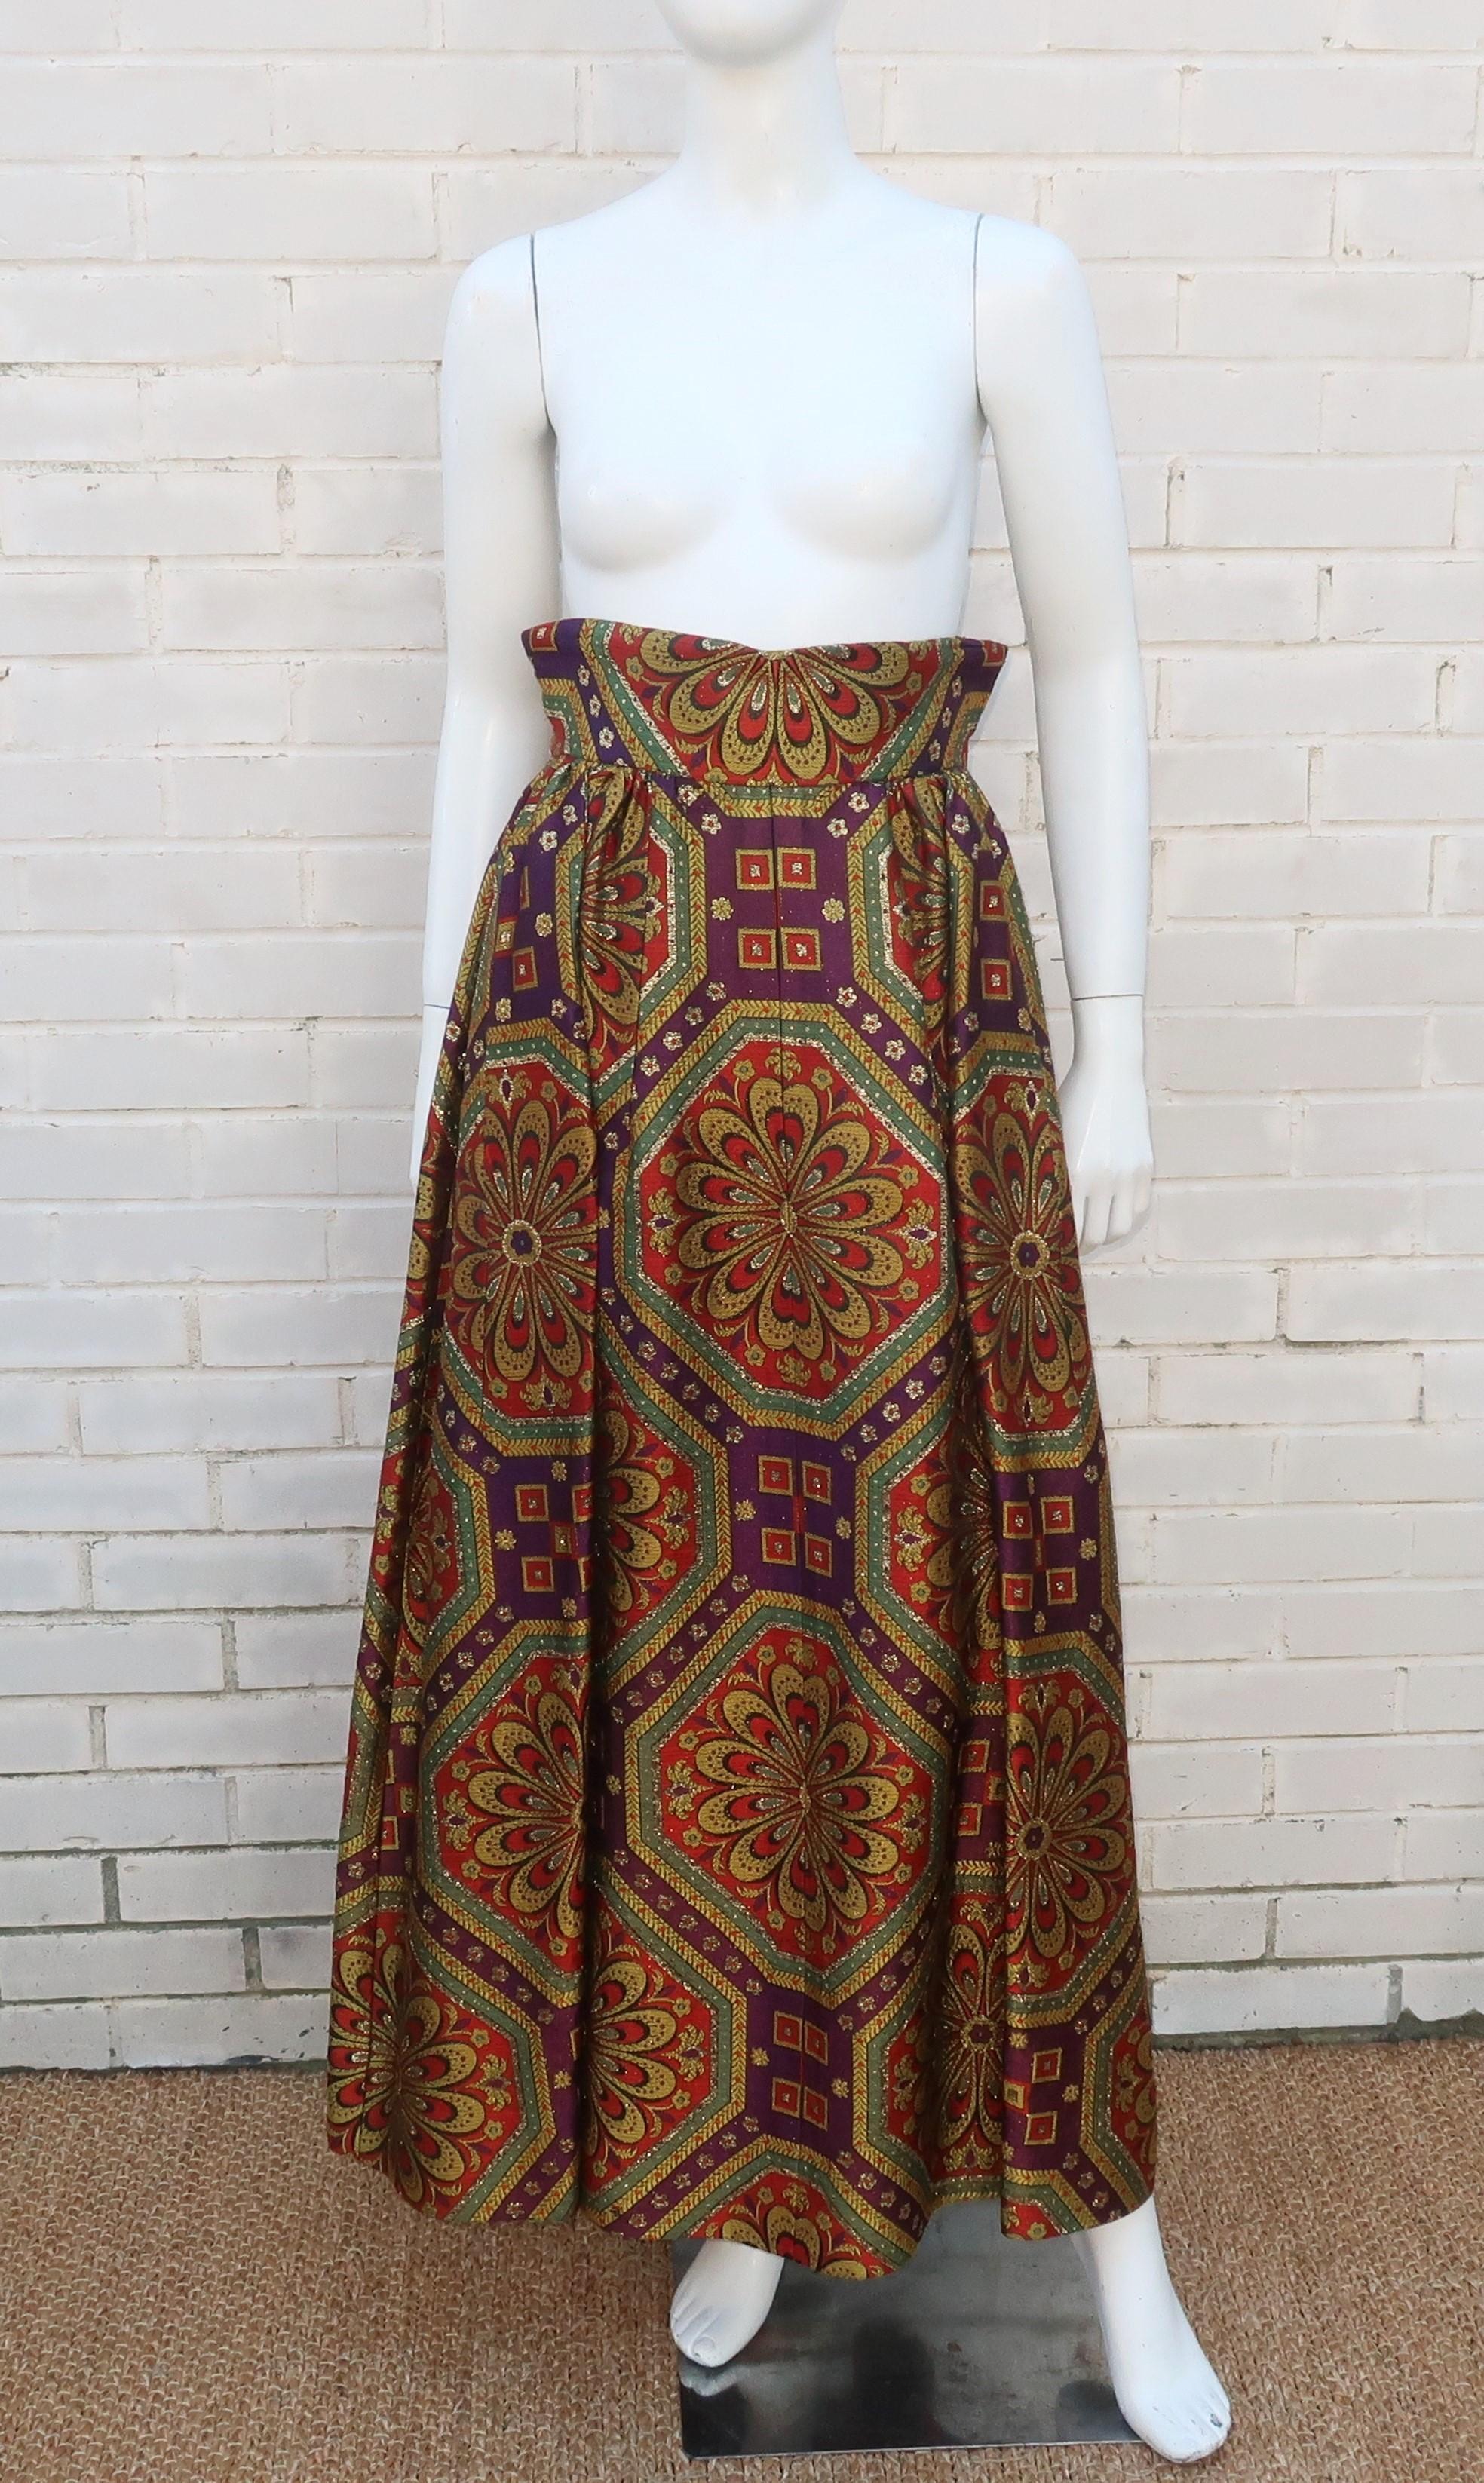 1960's heavy brocade skirt in a maxi length with a high waist.  The skirt zips at the back and has hidden front pockets.  The glamorous brocade is designed in shades of gold, purple, red and army green with gold lame metallic threading.  The fabric